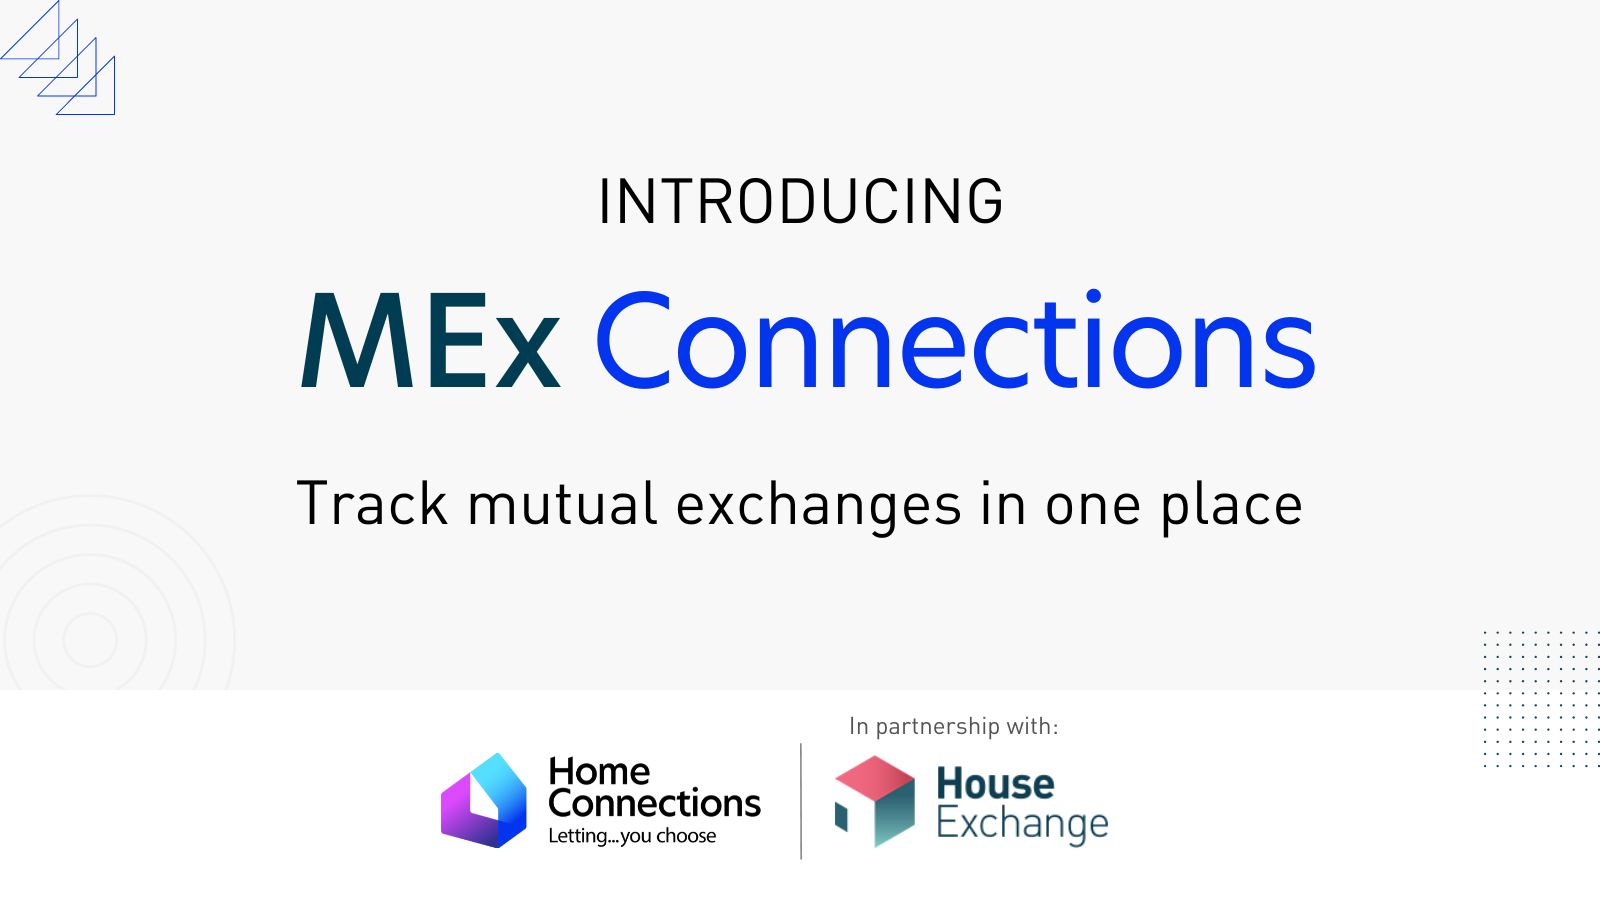 Banner introducing MEx Connections, new product by Home Connections and House Exchange